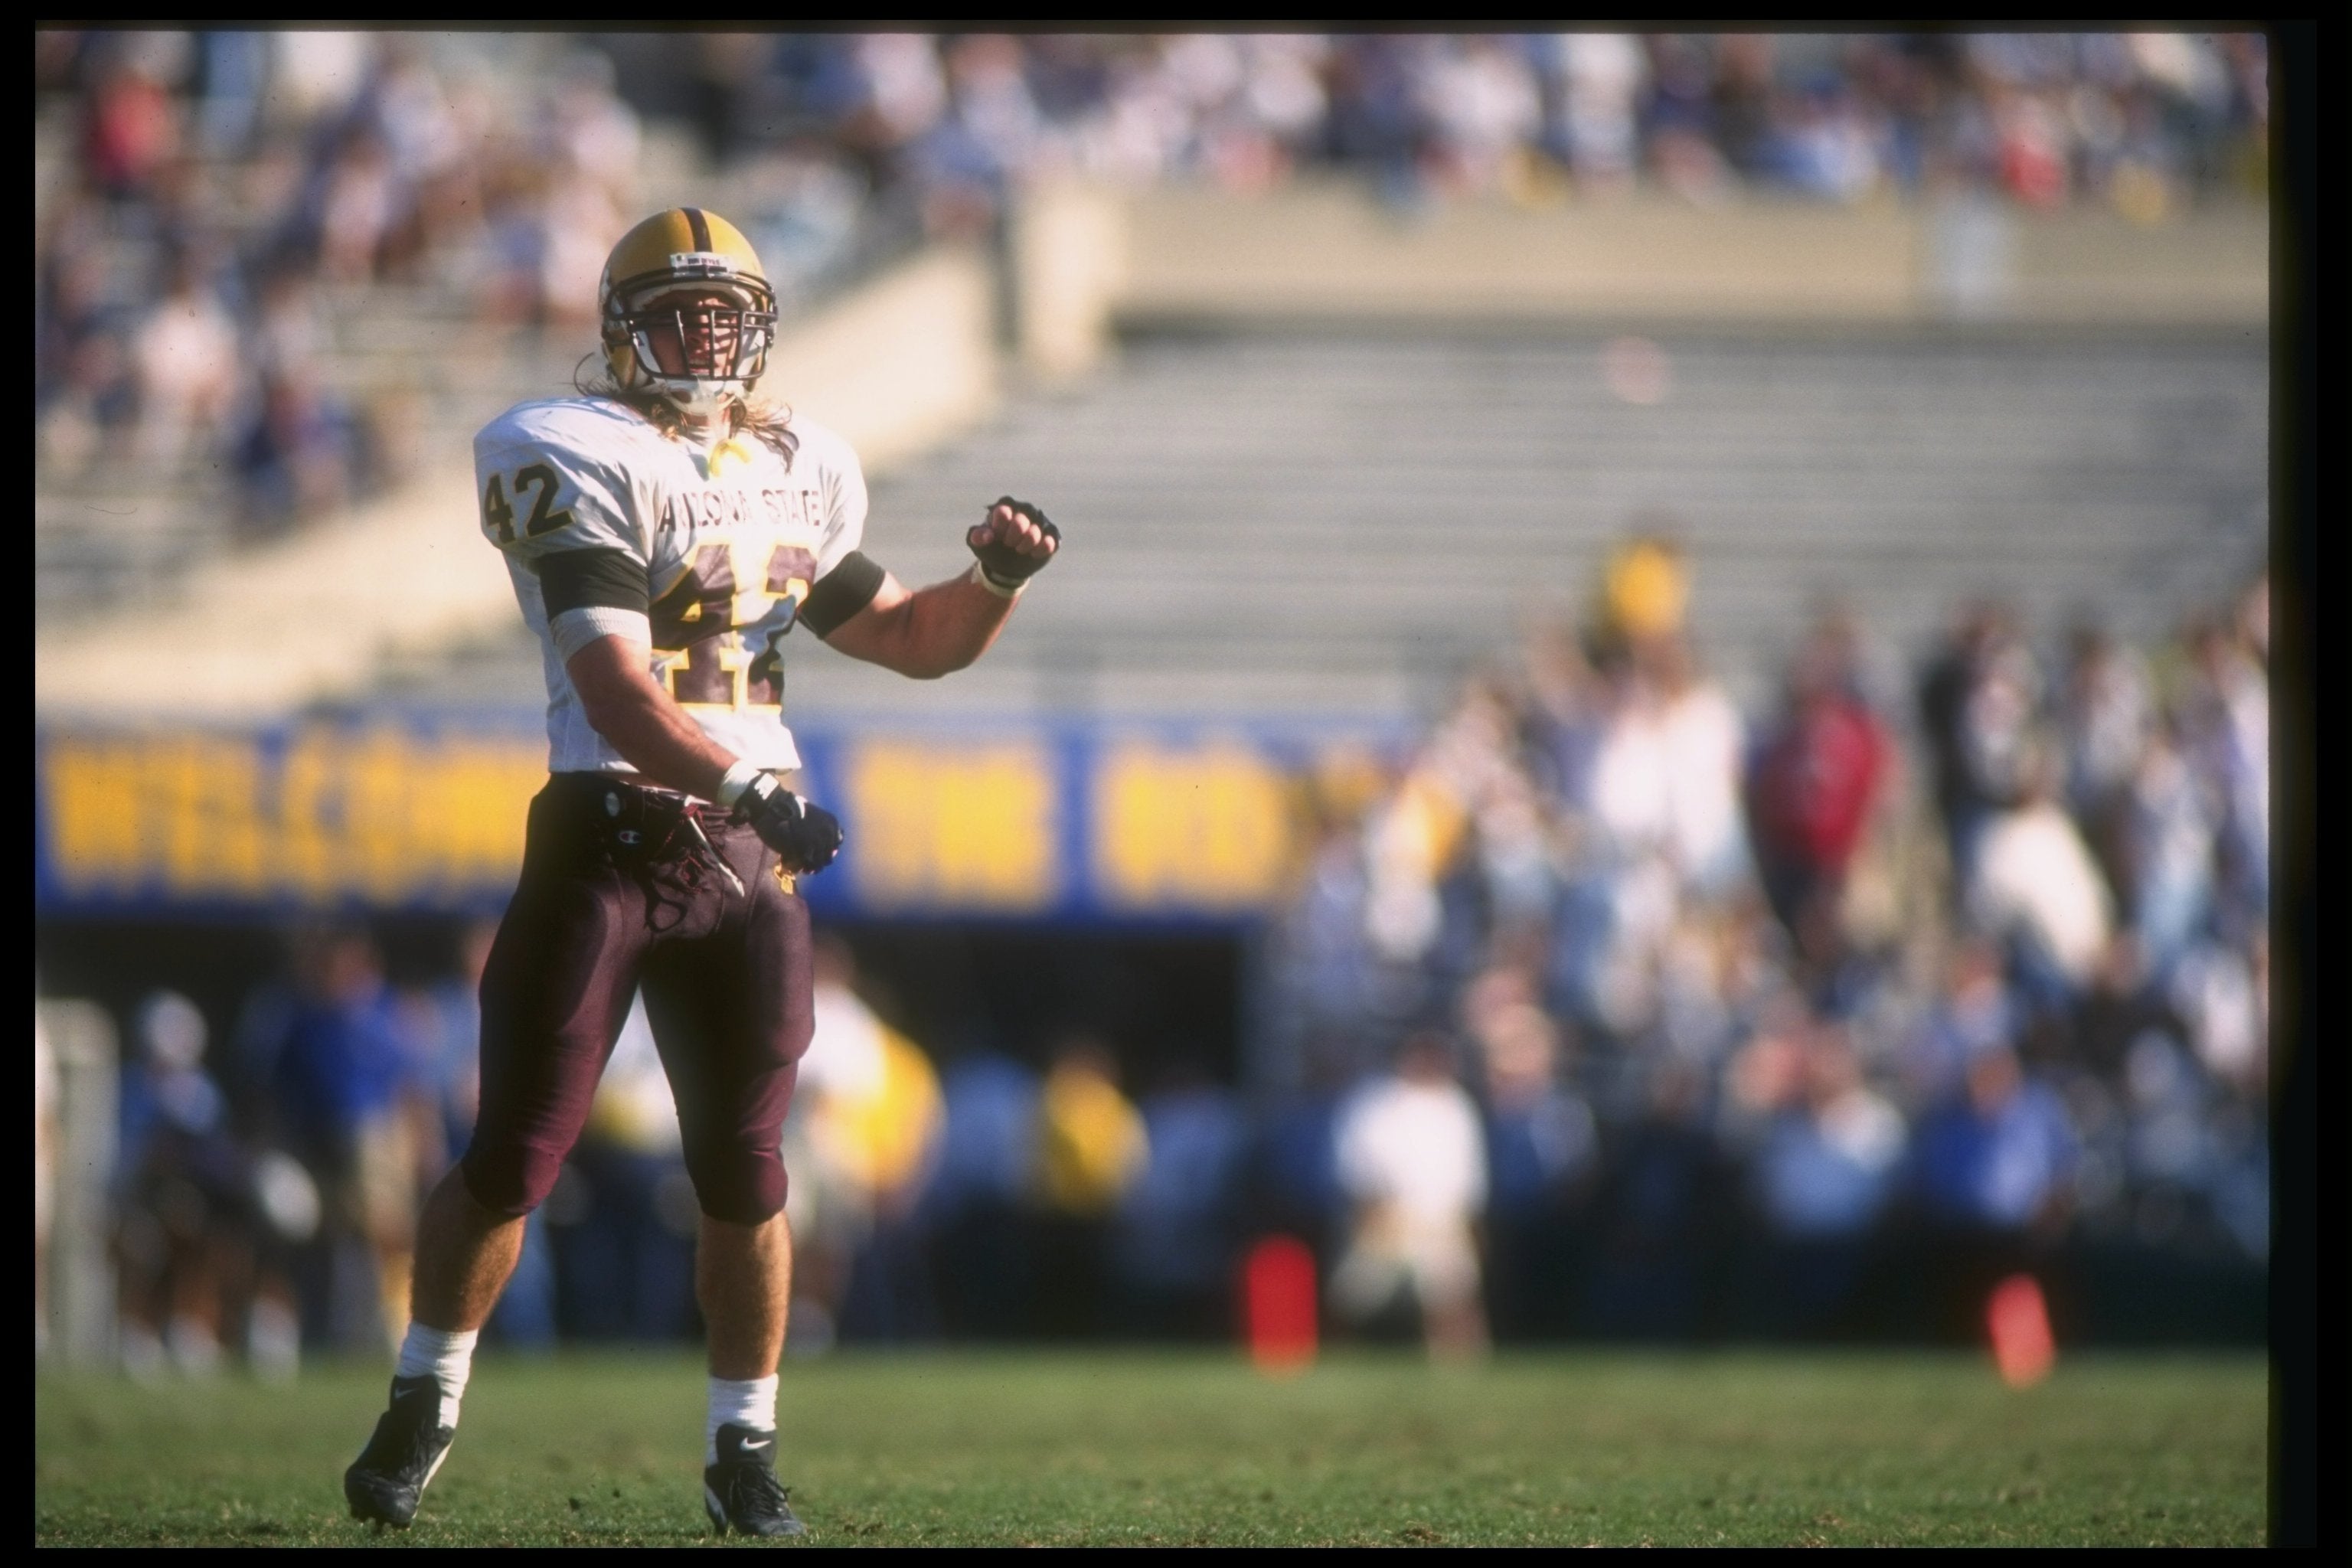 Pat Tillman of the Arizona State Sun Devils celebrates during a game against the UCLA Bruins at the Rose Bowl in Pasadena, California, on 12 October 1996